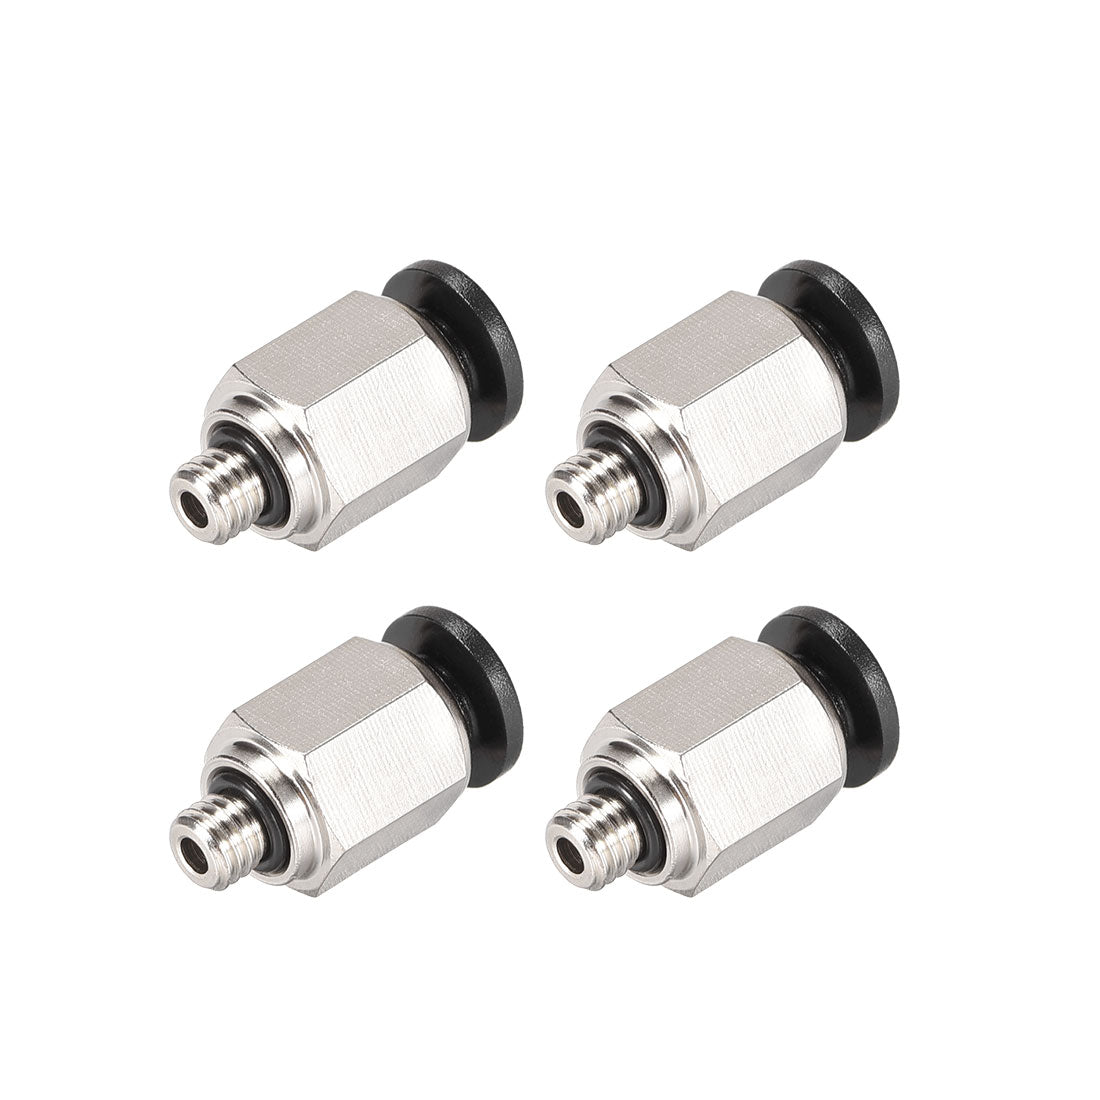 uxcell Uxcell Straight Pneumatic Push to Quick Connect Fittings M5 Male x 4mm Tube OD Silver Tone 4pcs